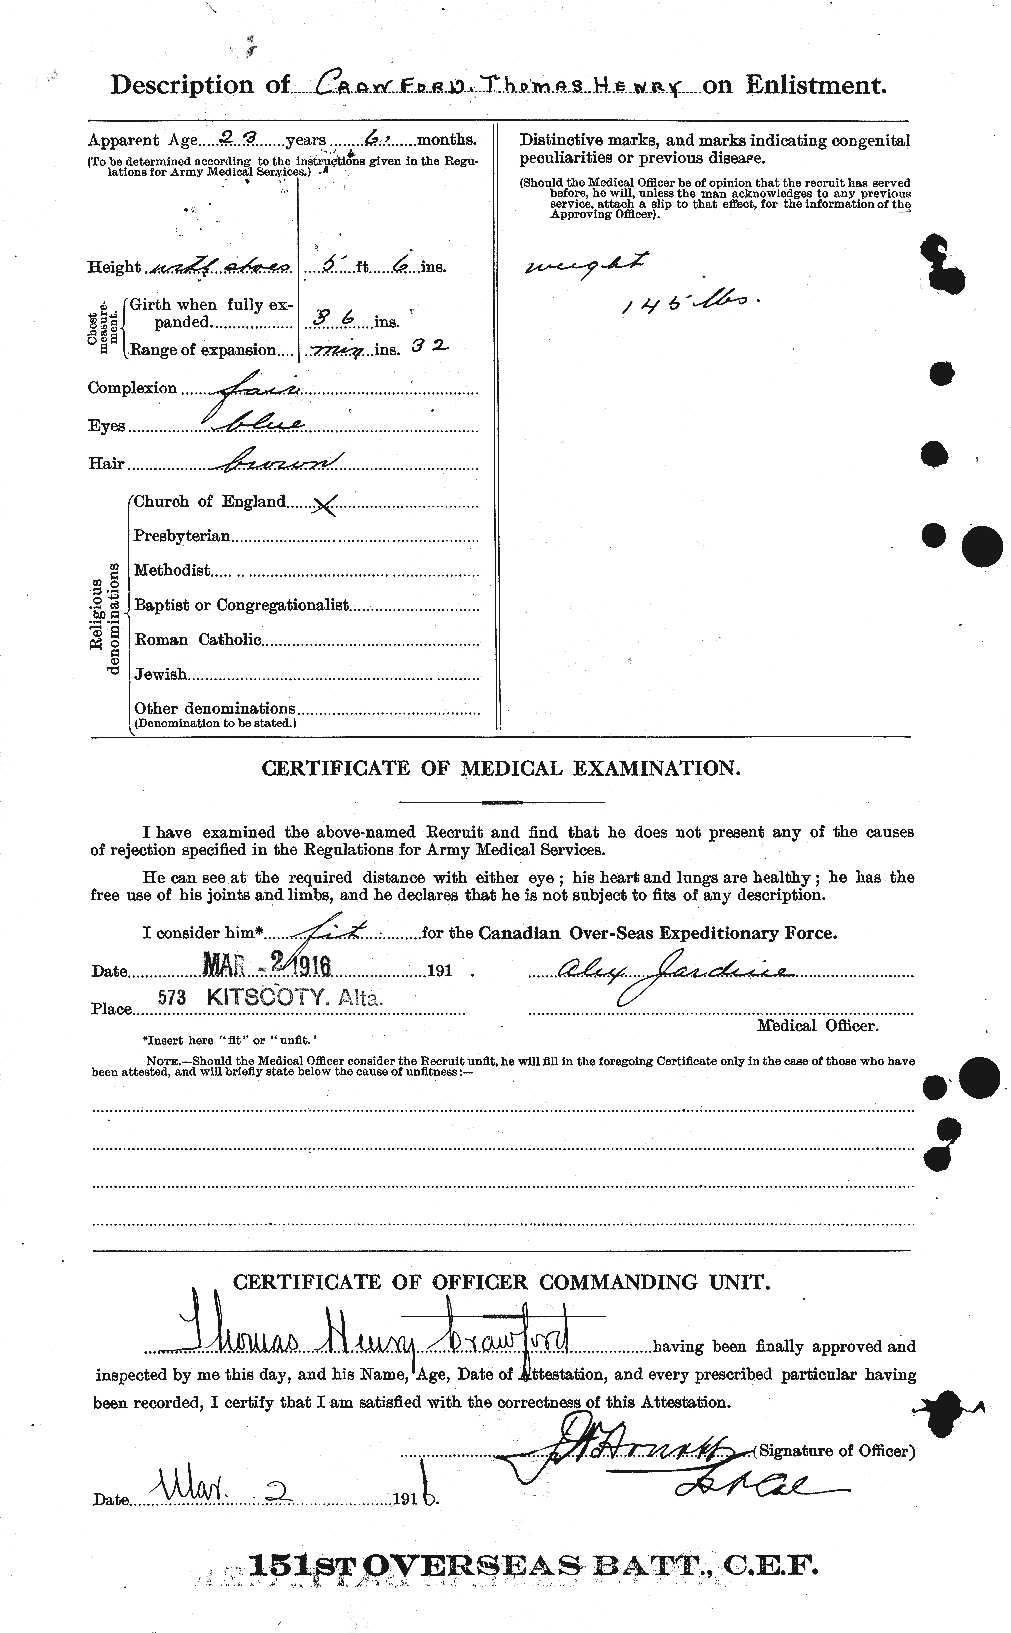 Personnel Records of the First World War - CEF 061352b